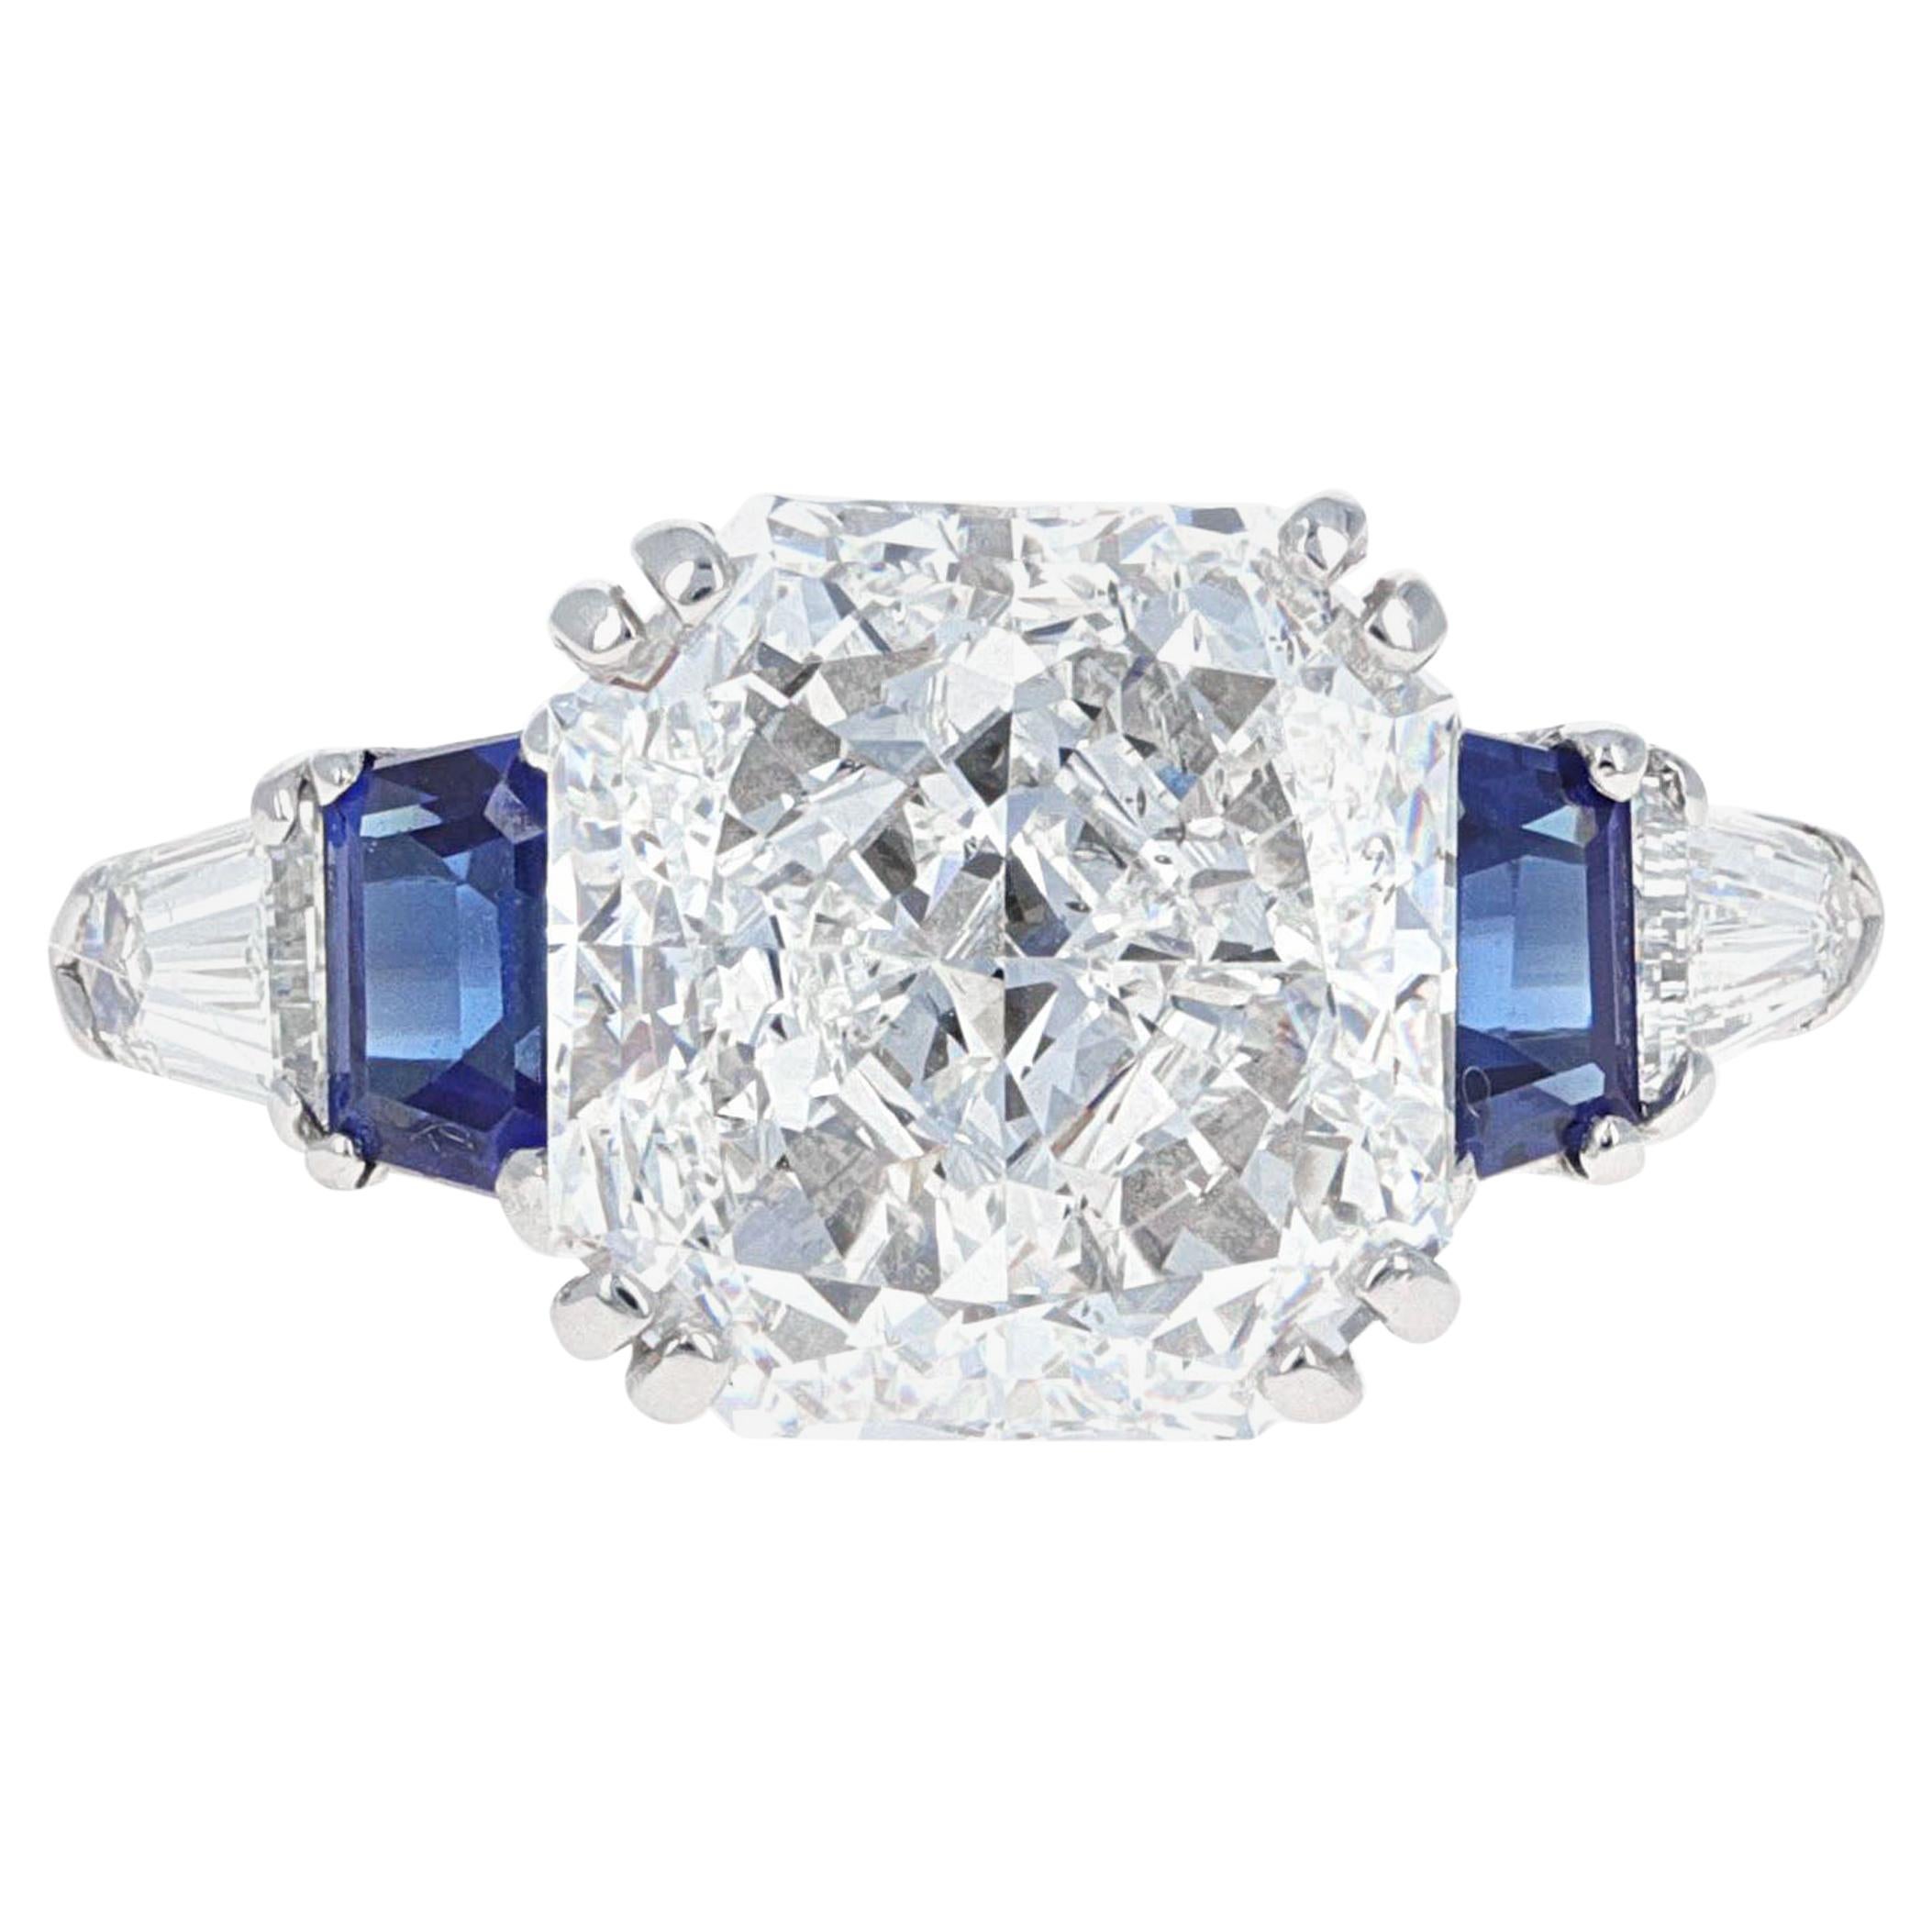 GIA Certified, 5.00 Carat Radiant Cut Diamond and Sapphire Engagement Ring